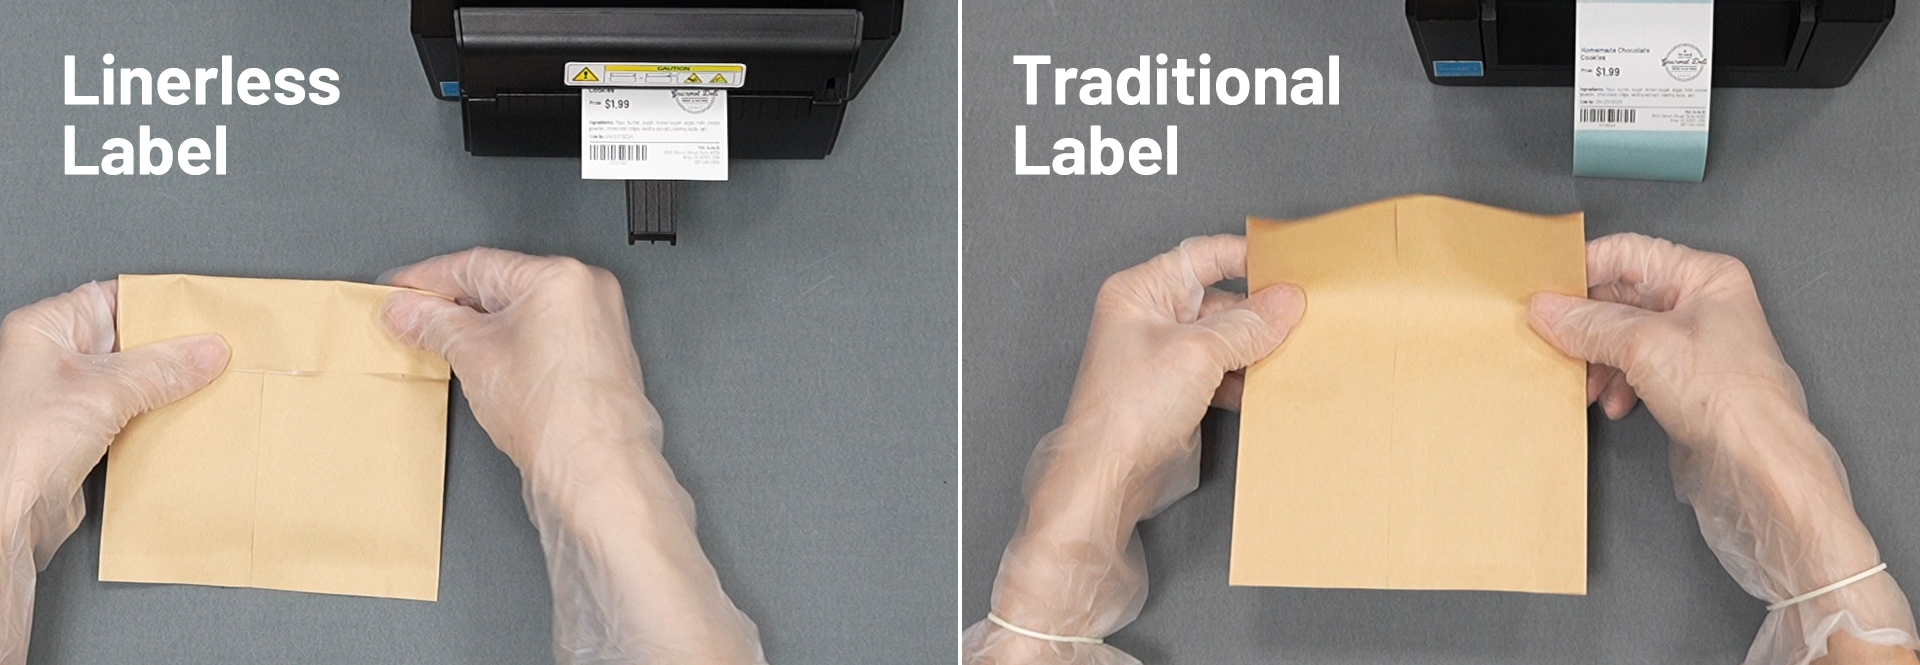 Linerless Label vs Traditional Label